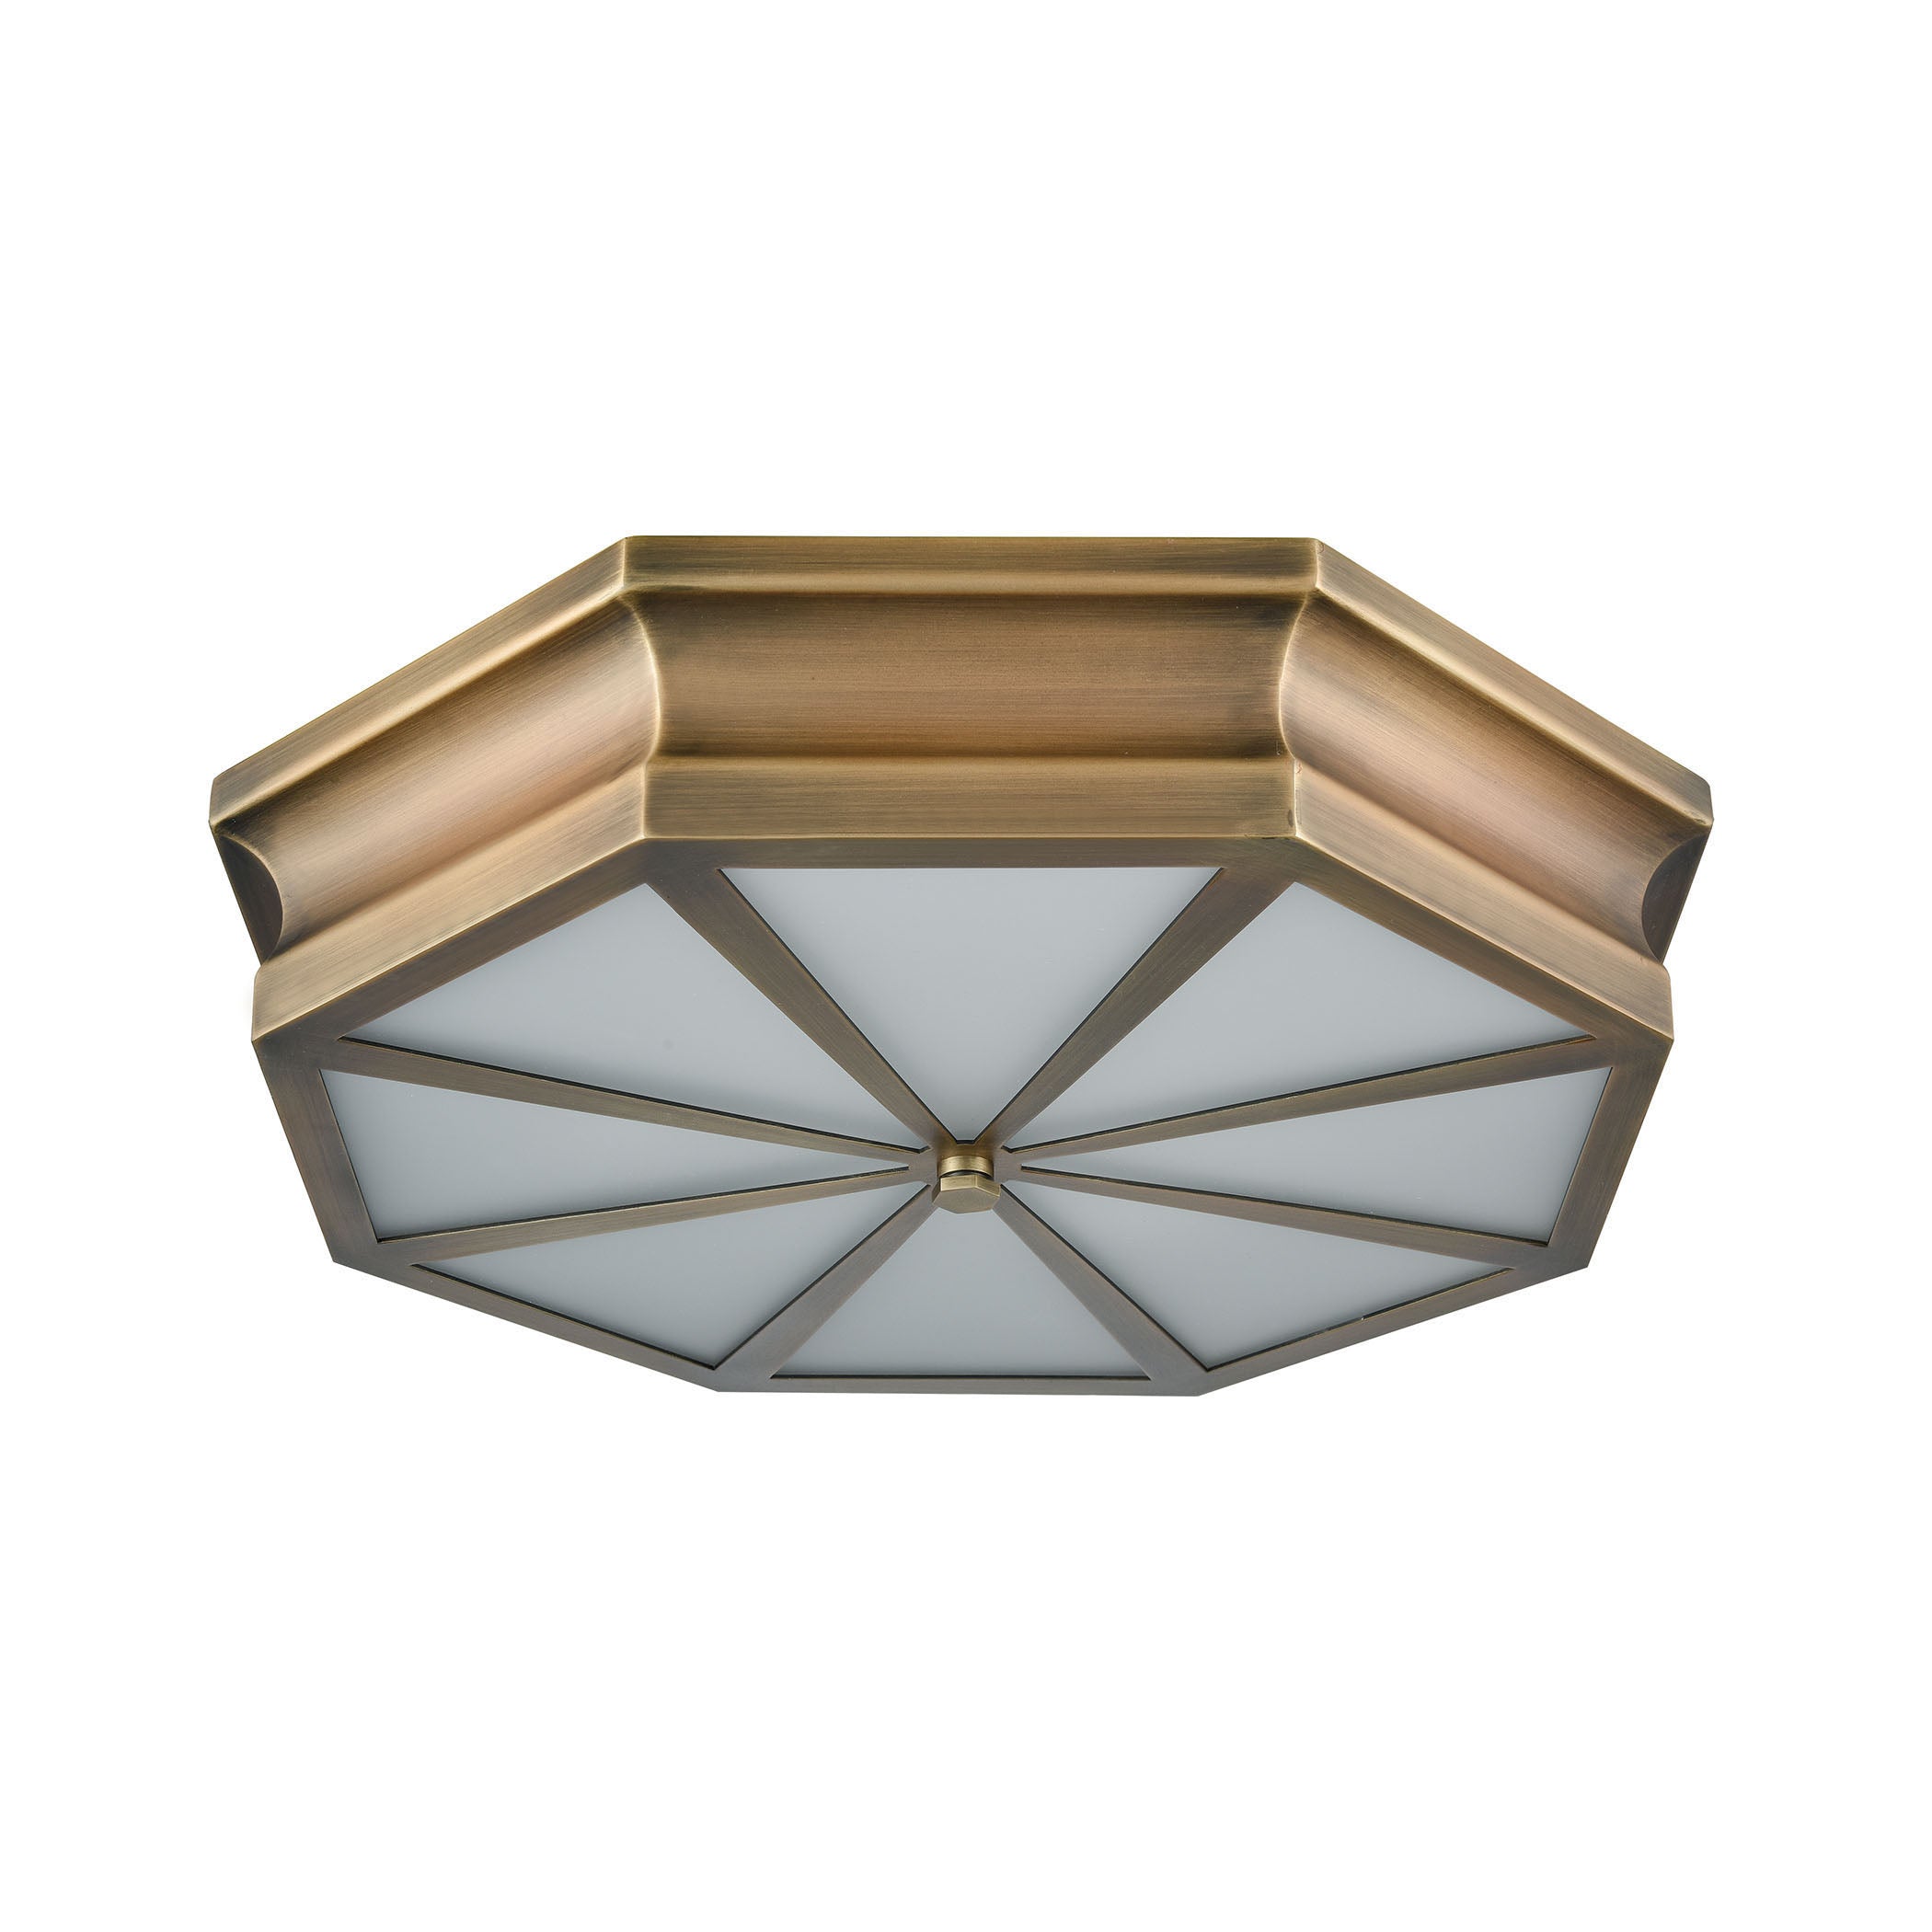 ELK Lighting 68111/3 Windsor 3-Light Flush Mount in Classic Brass with Frosted Glass Diffuser